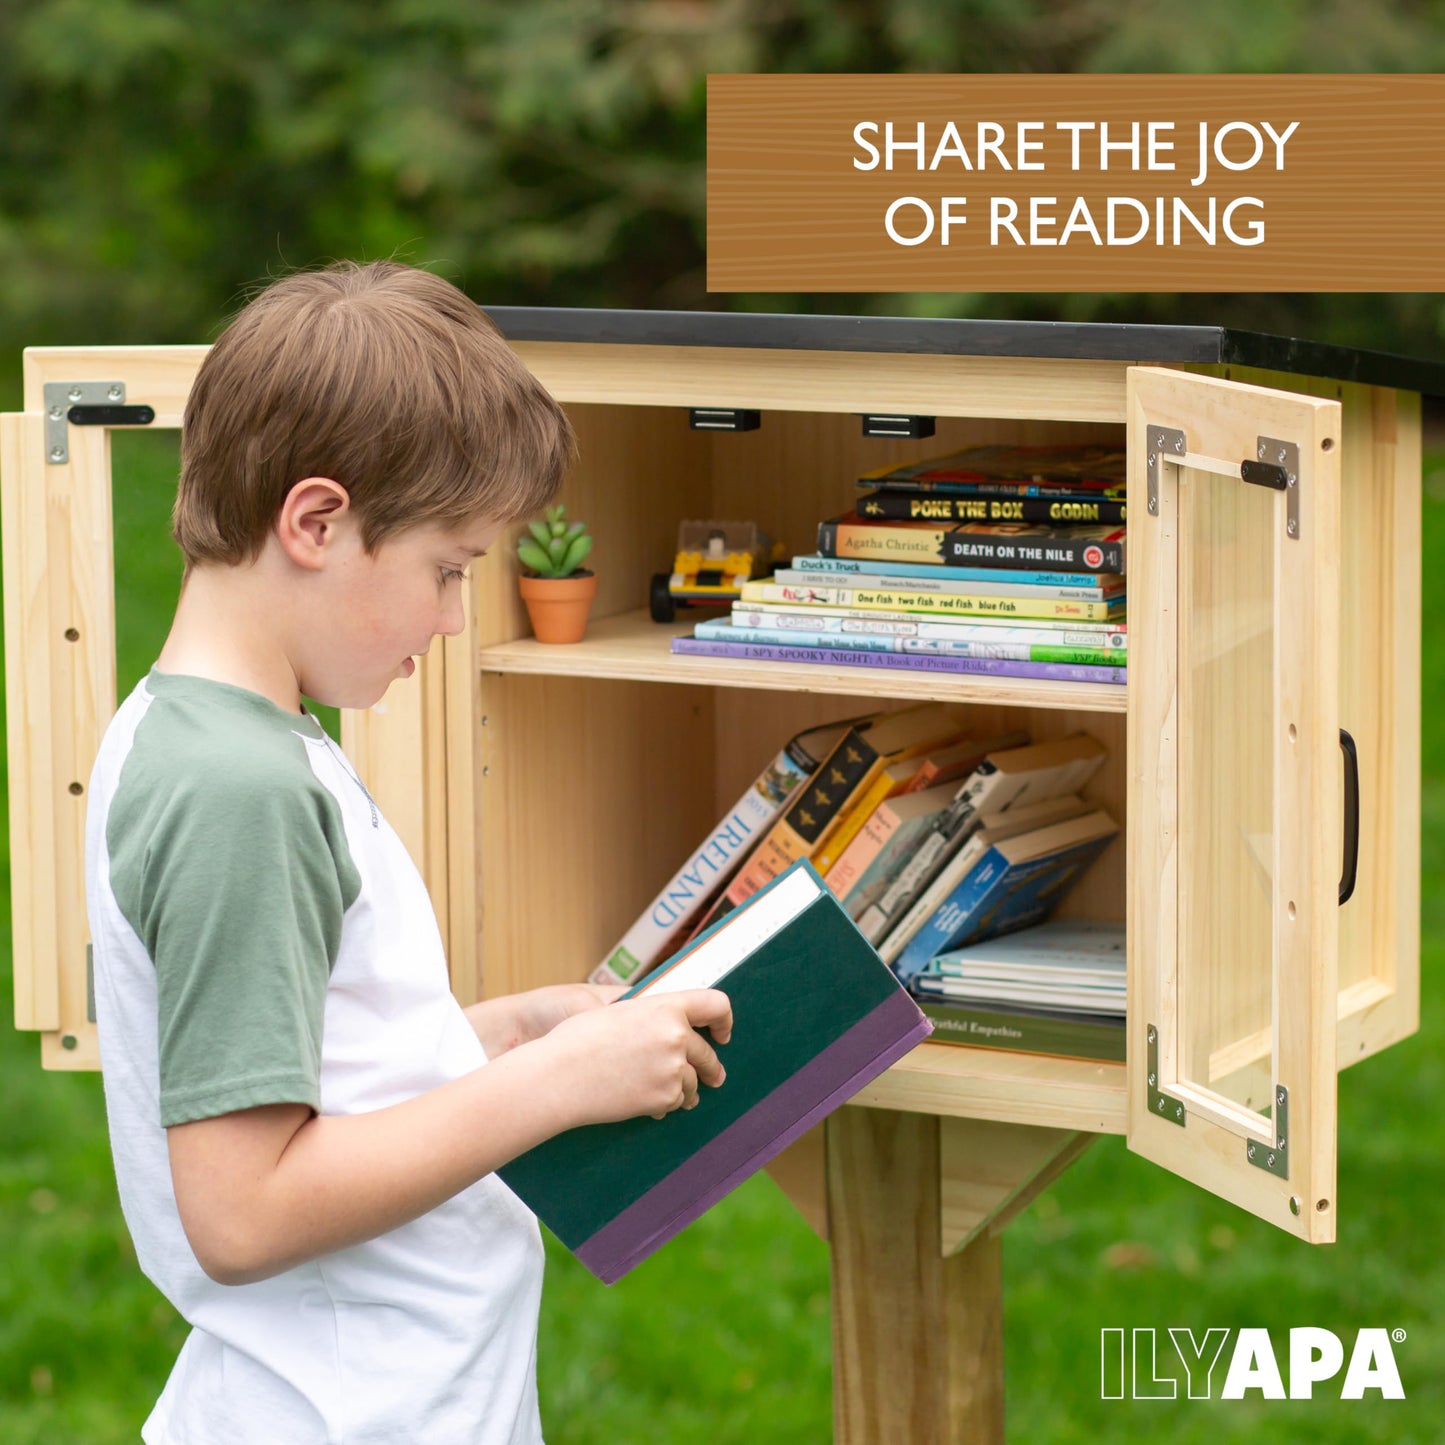 Ilyapa Little Free Library Box Outdoor Kit Free Community Book Exchange 20x14x19 inch Wood Cabinet for Sharing Literature, Books, Flyers, Food & Art with Your Neighborhood, Students or Teachers